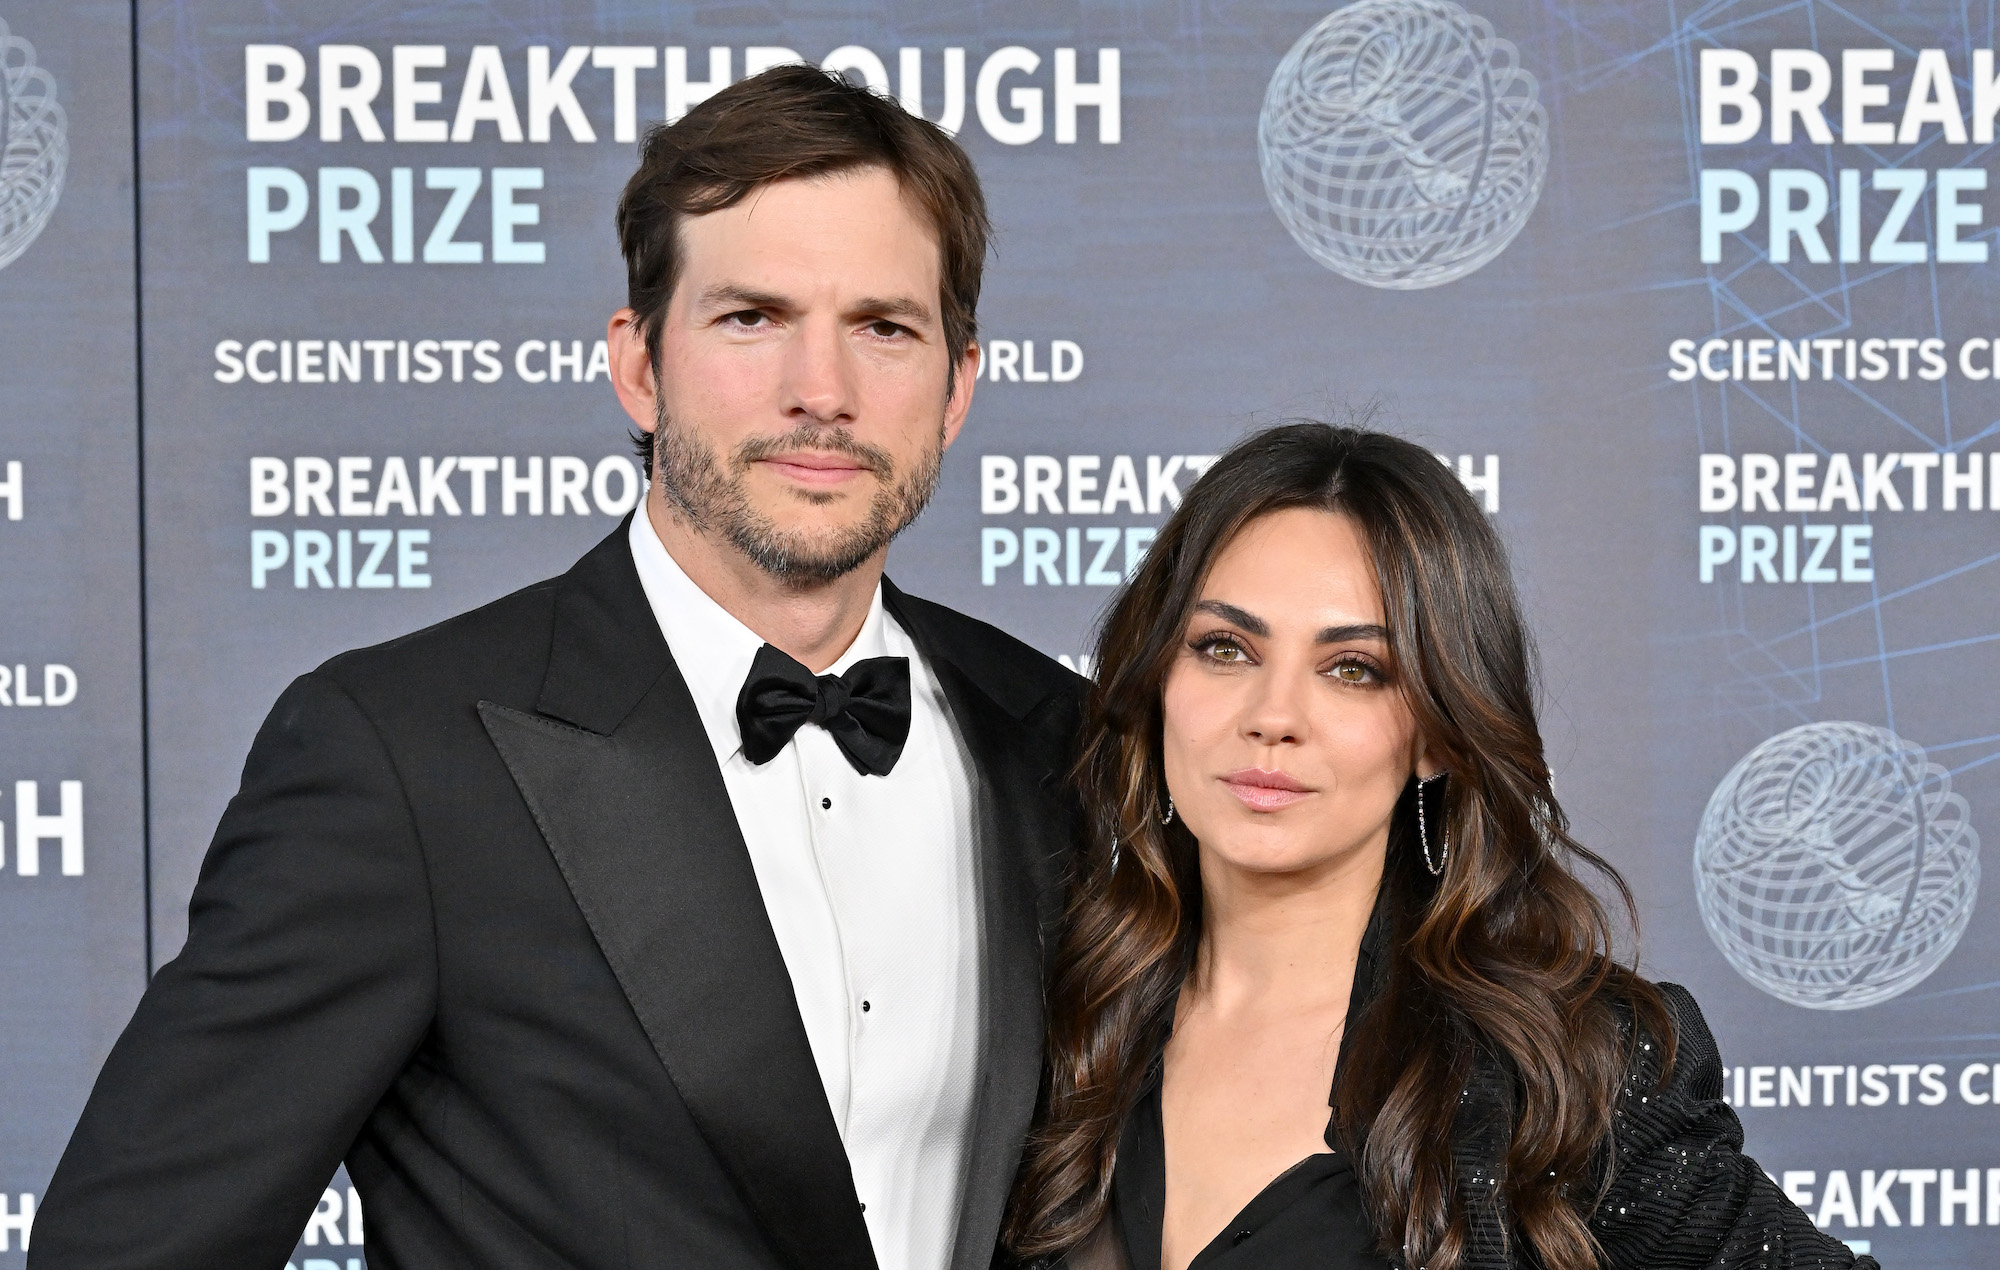 Ashton Kutcher and Mila Kunis apologise for statements supporting Danny Masterson